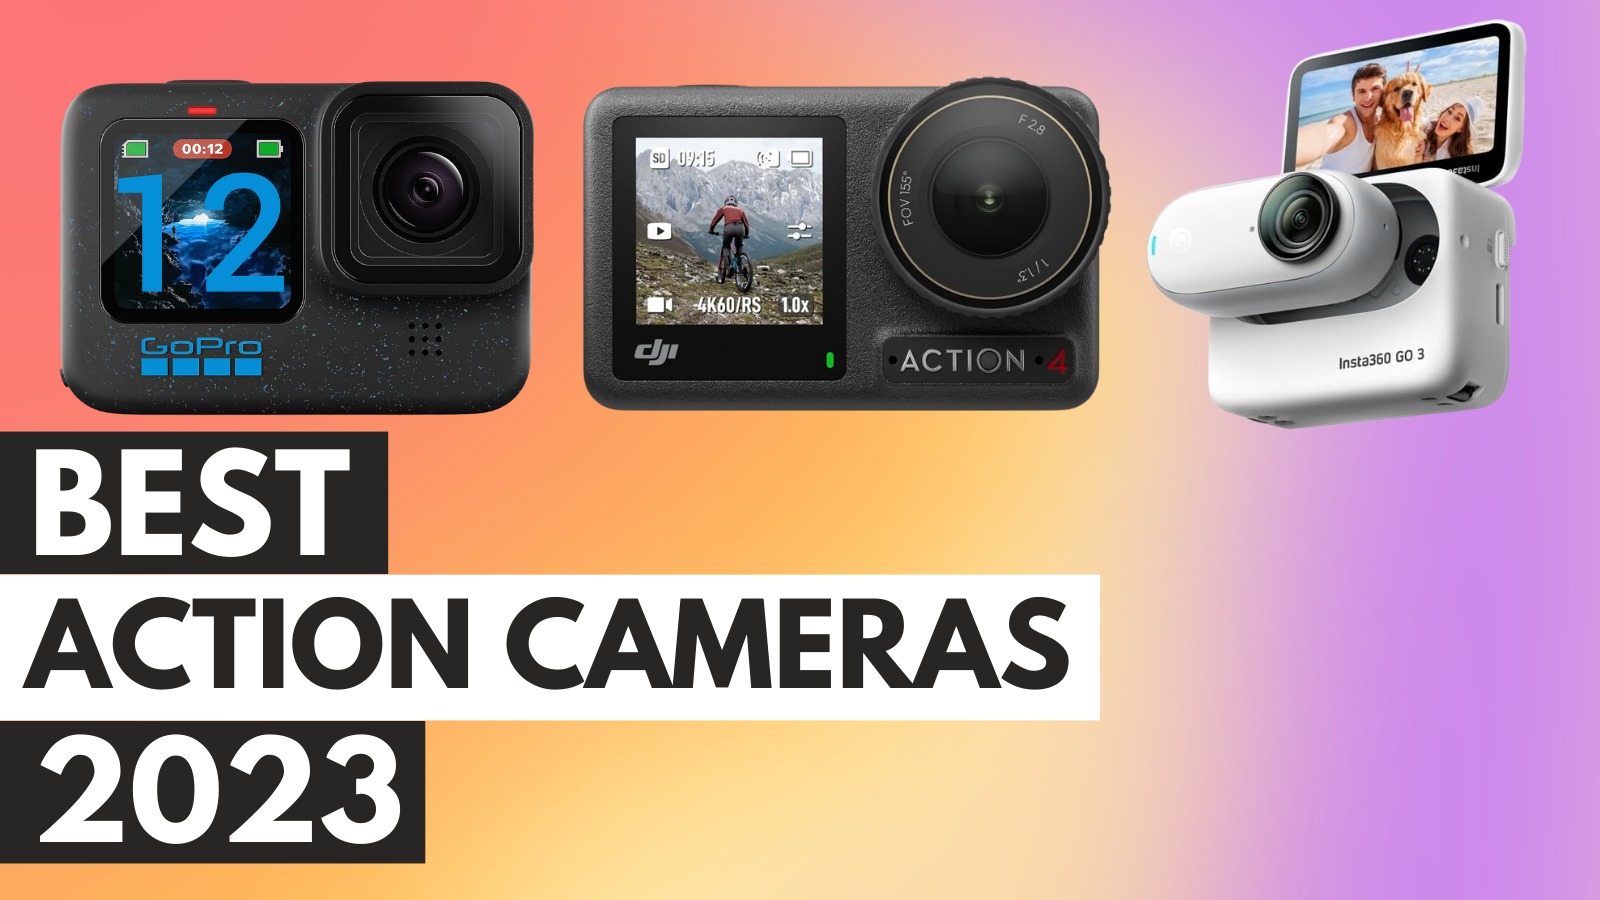 6 Best Action Cameras of 2023